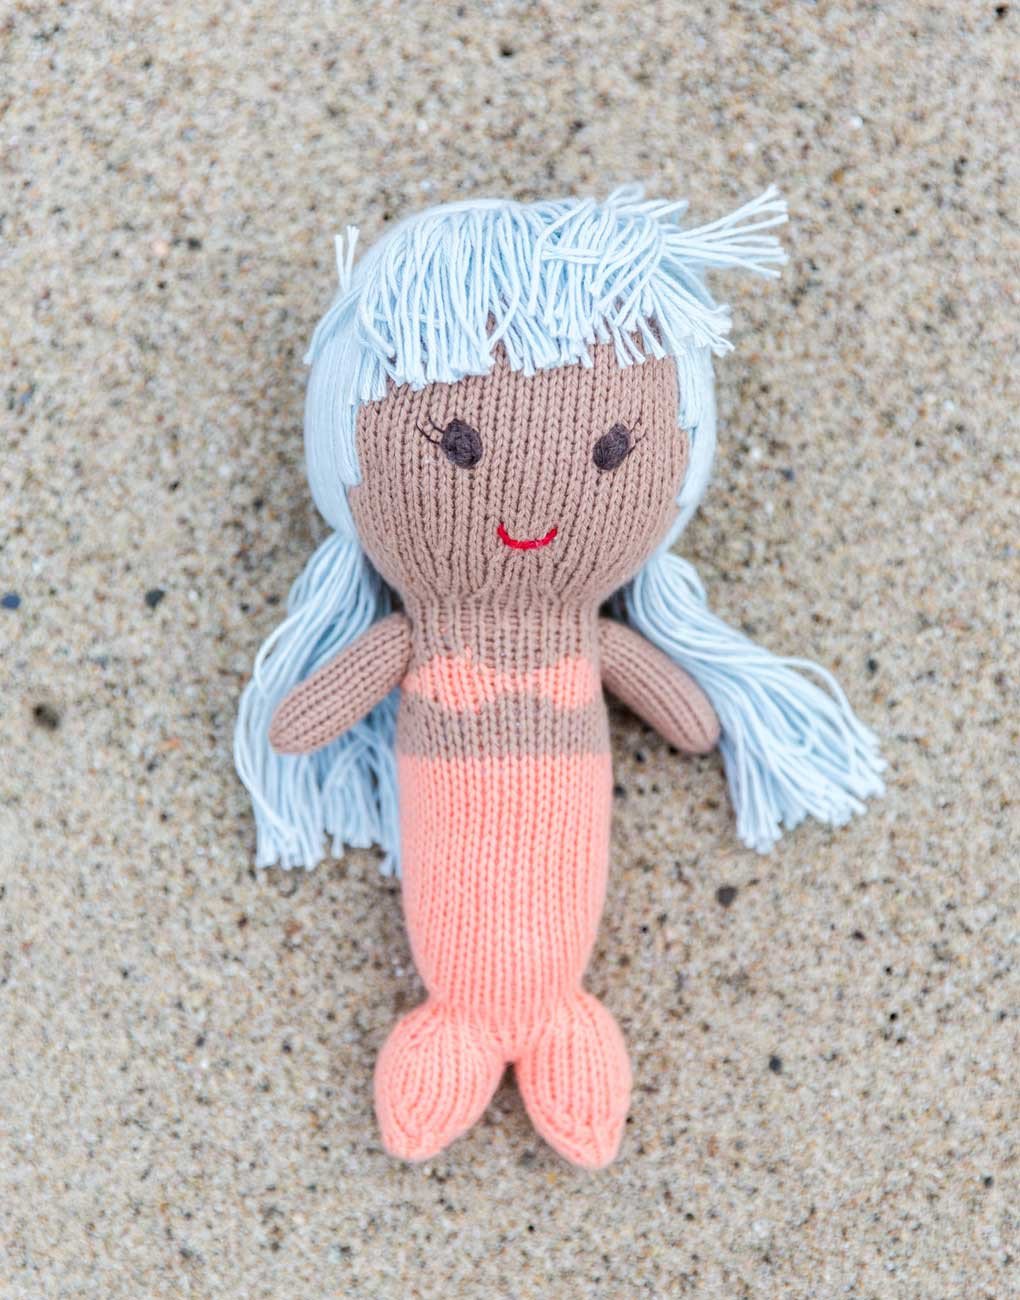 Mermaid doll from The Little Market